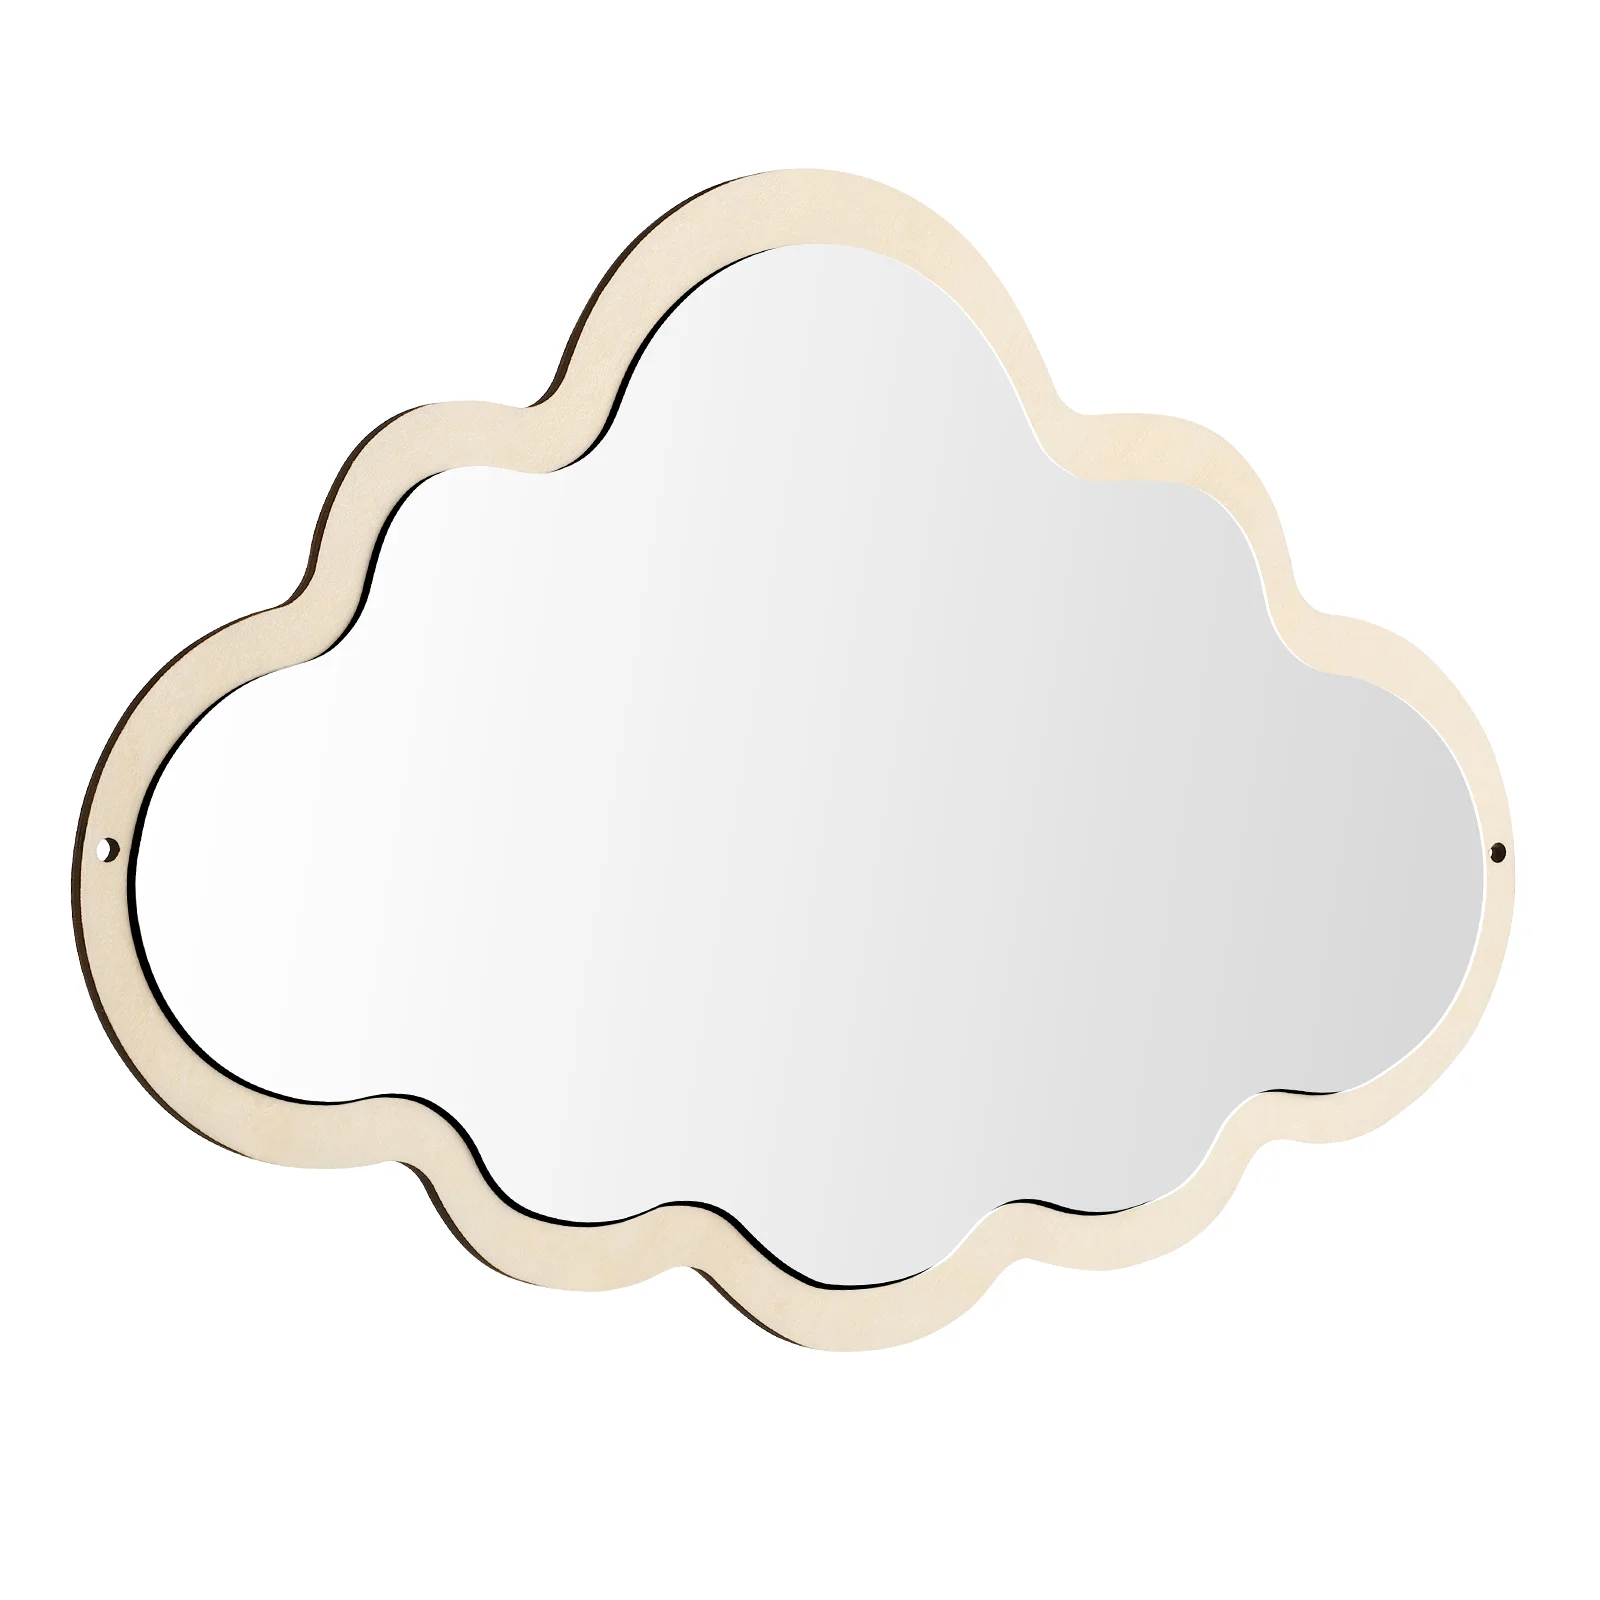 

Mirror Wall Decorative Acrylic Mirrors Wooden Sticker Cloud Decor Shatterproof Shaped Adhesive Safety Nordic Vanity Children